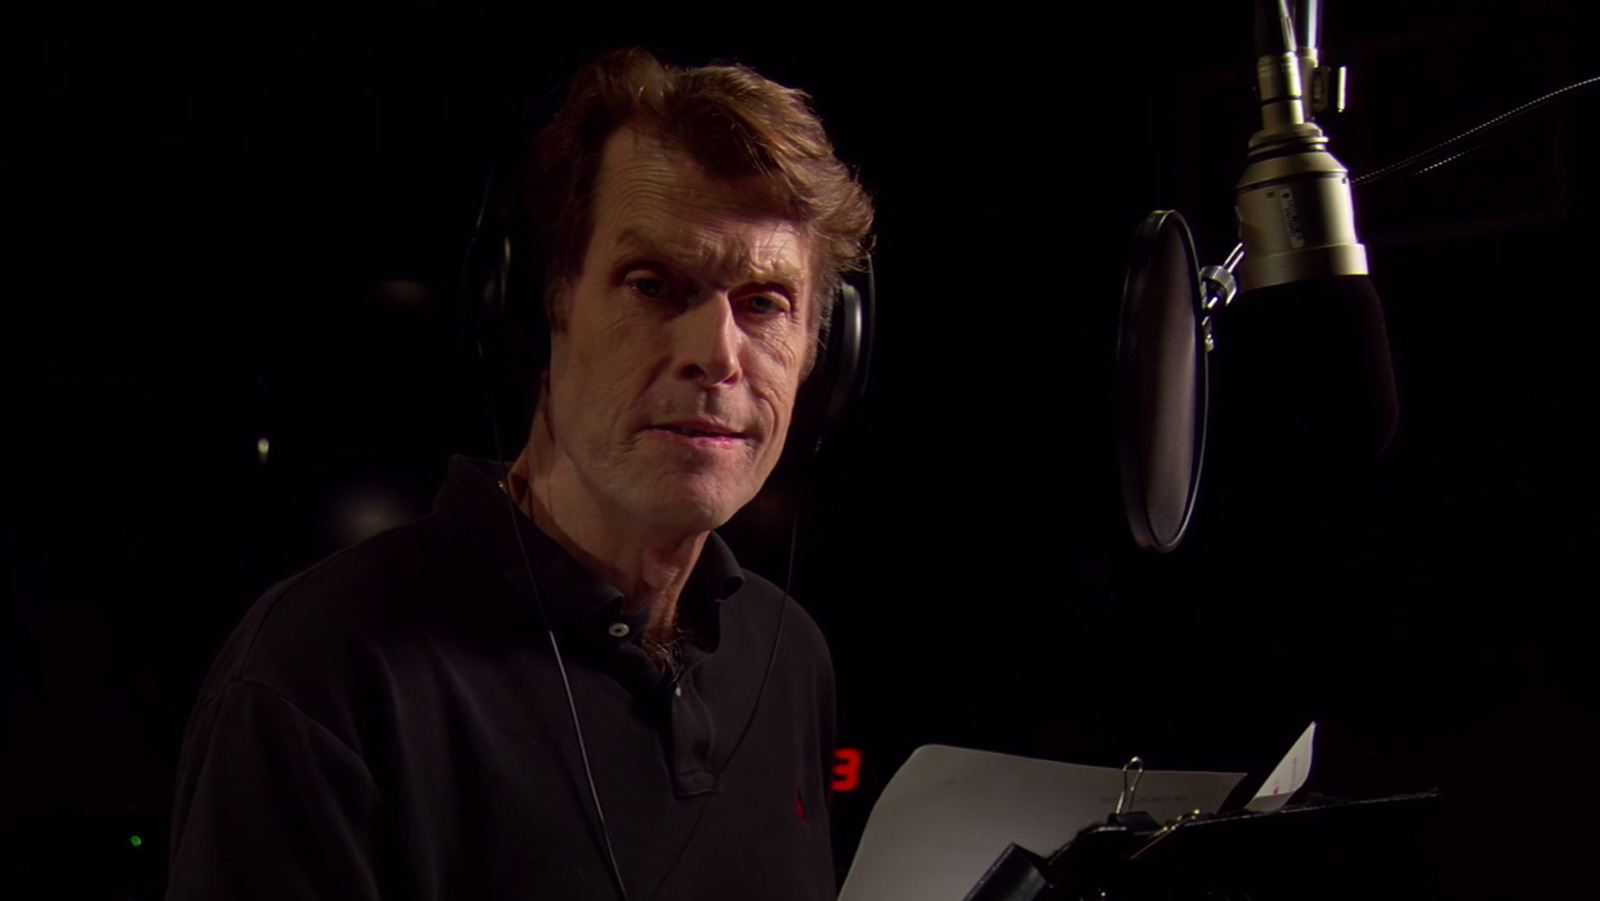 Generation Star Wars: Kevin Conroy, the voice of Batman, has died